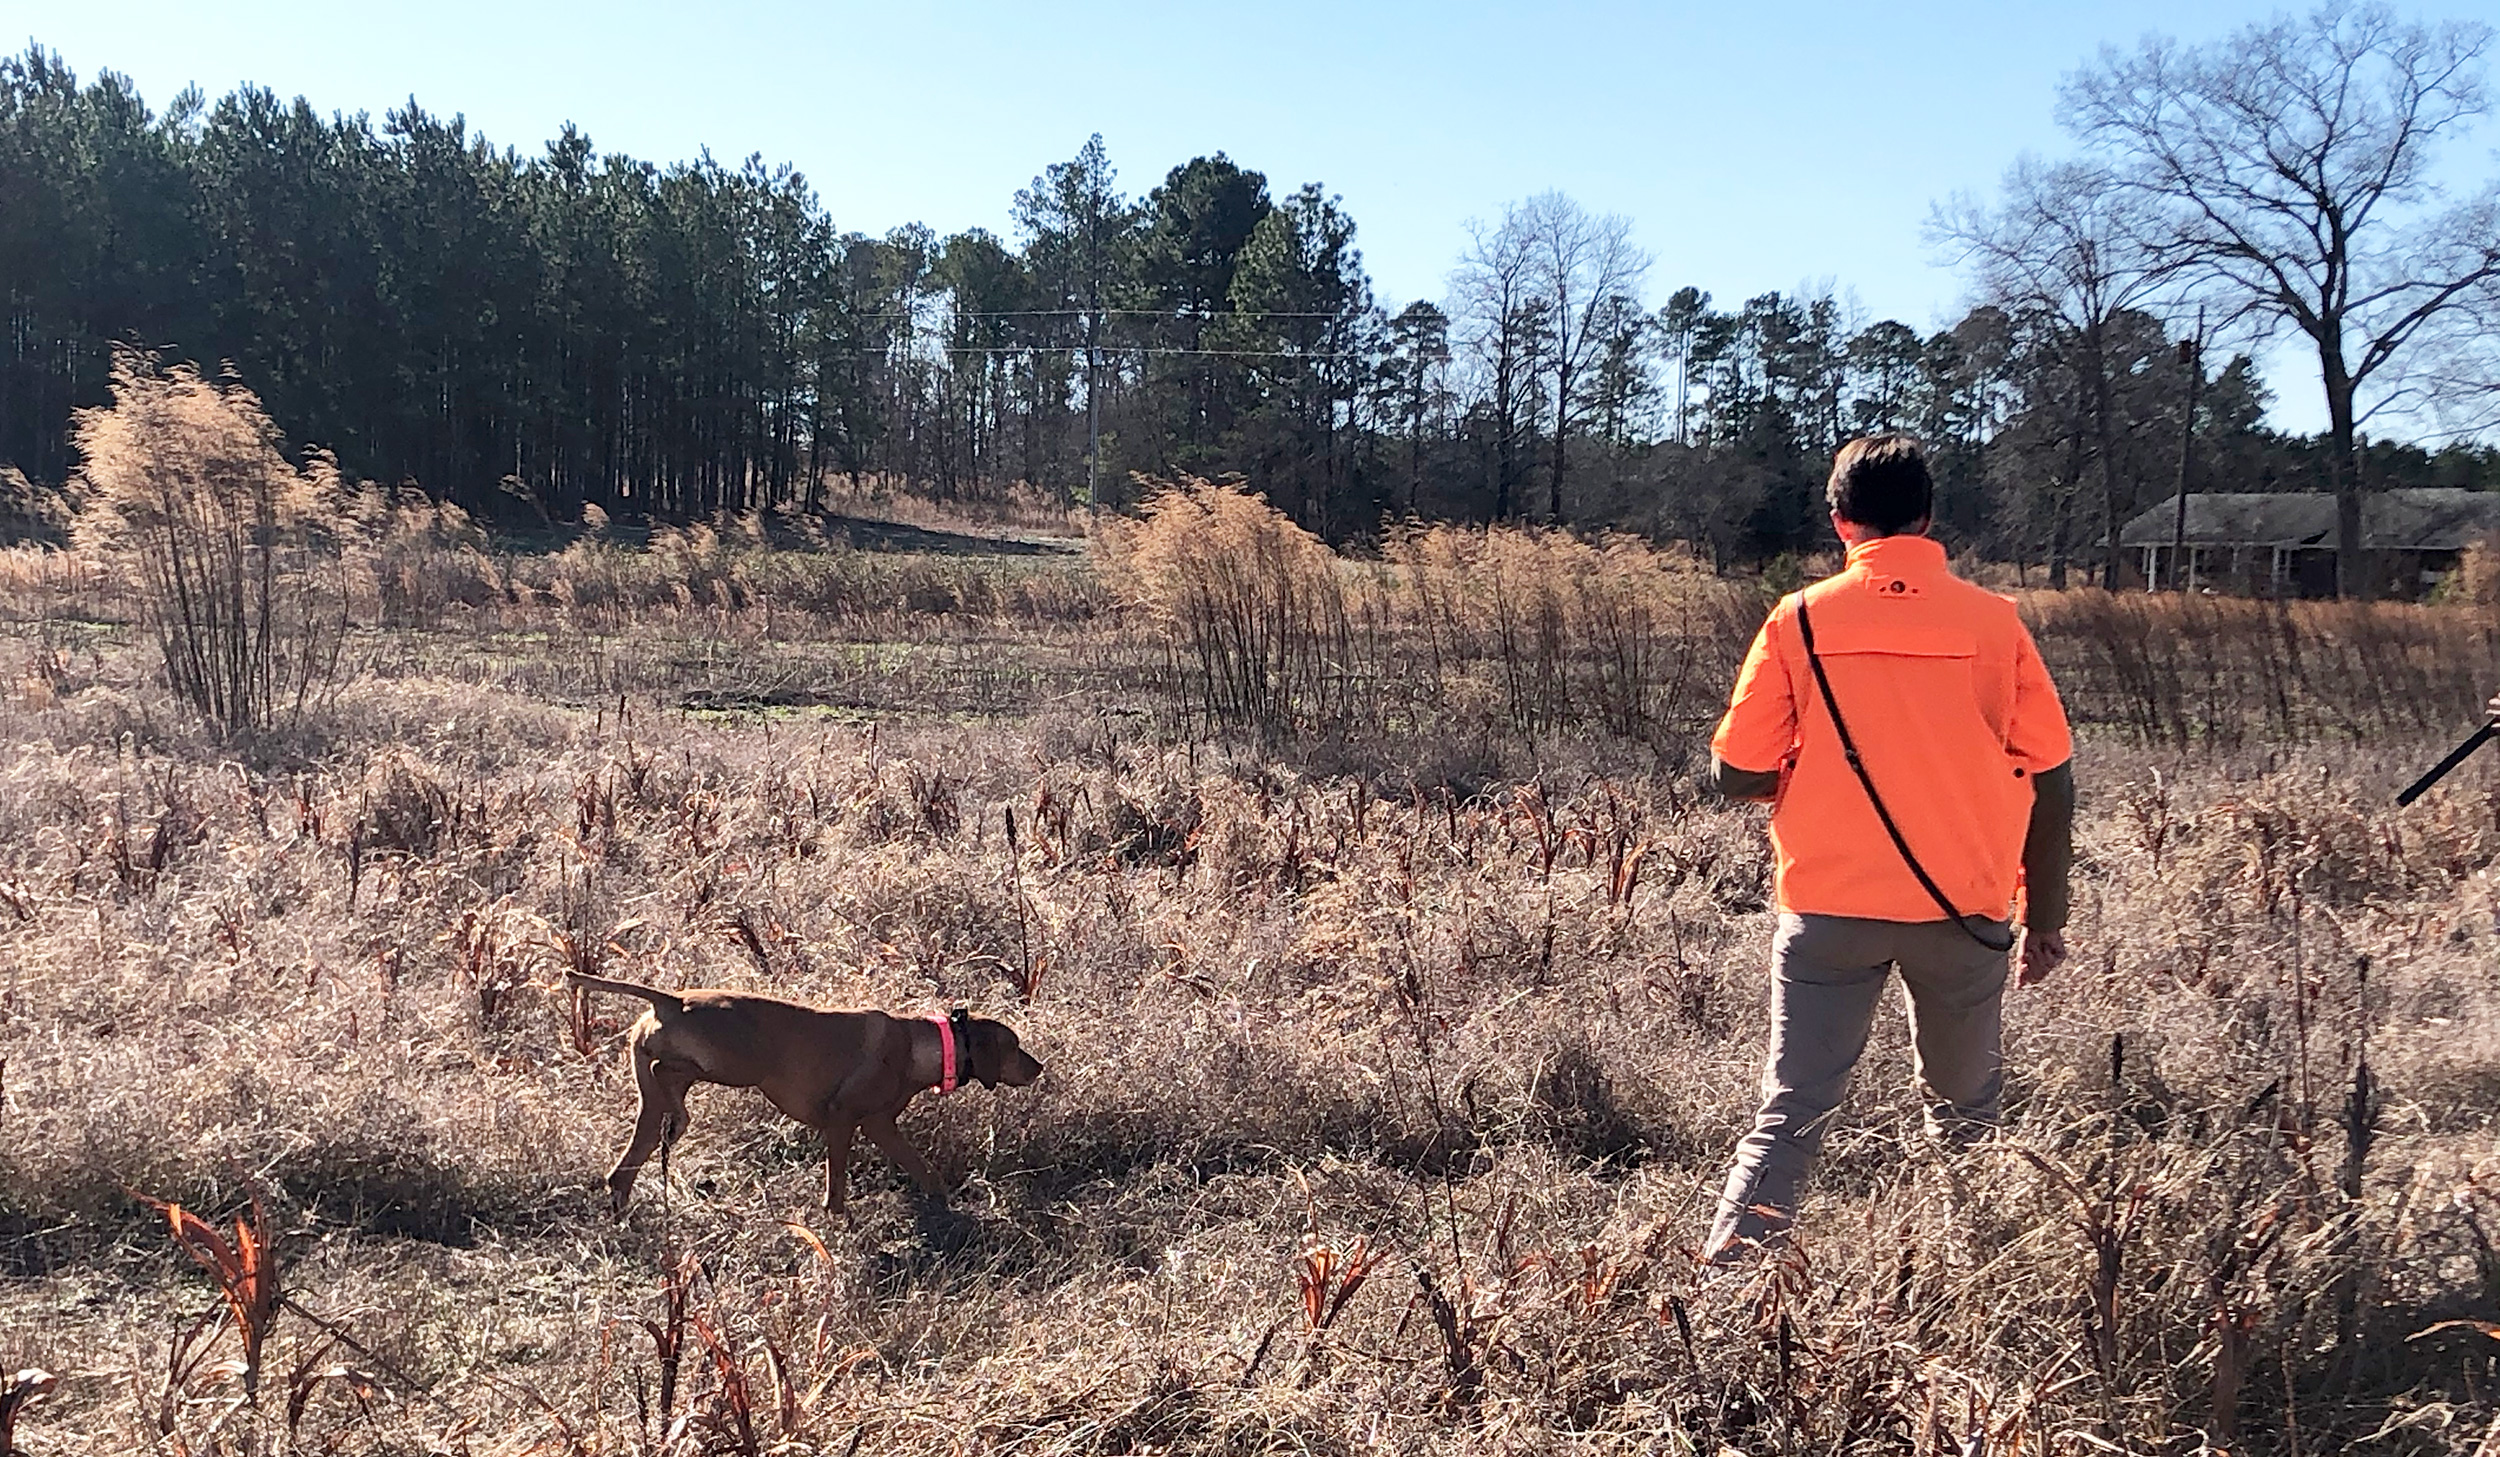 Who is the Accidental Bird Dog?